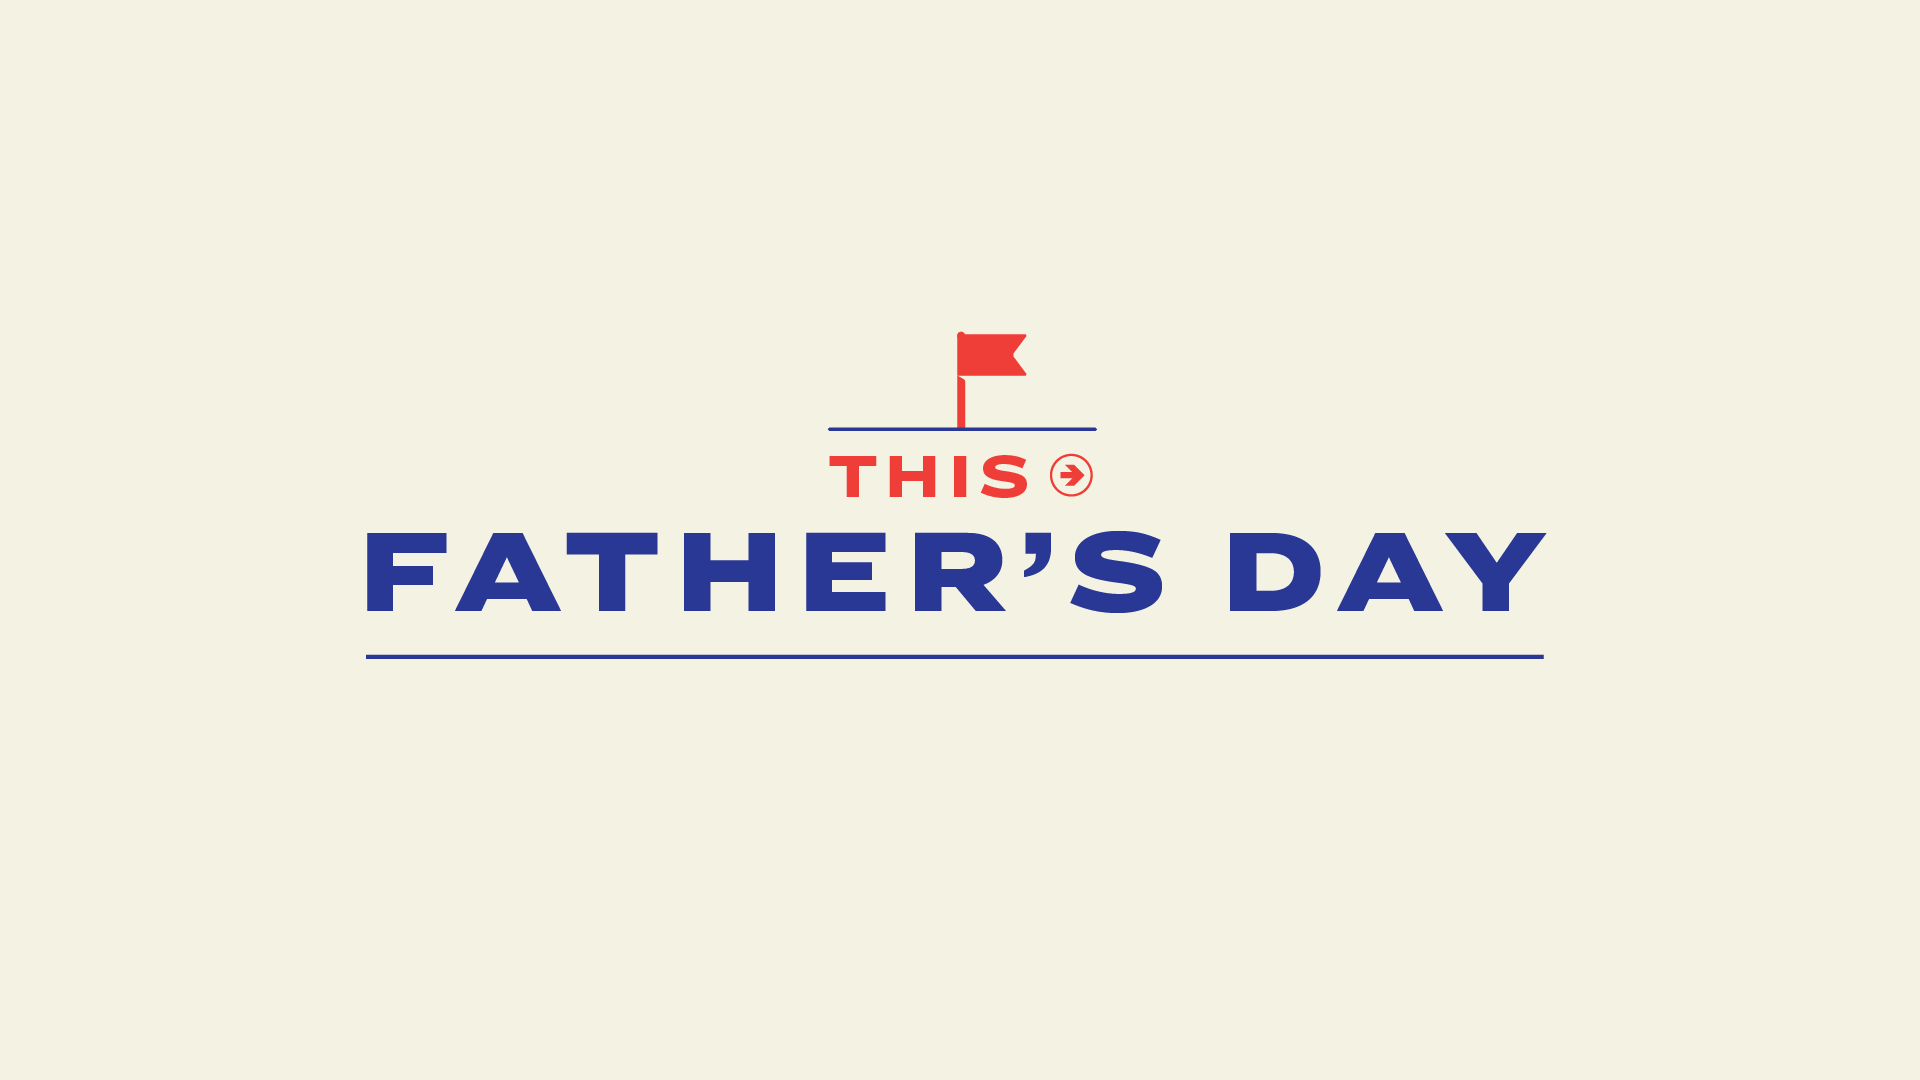 ACA-190530_FATHERS_DAY_BOARDS_cv_v05-01.png